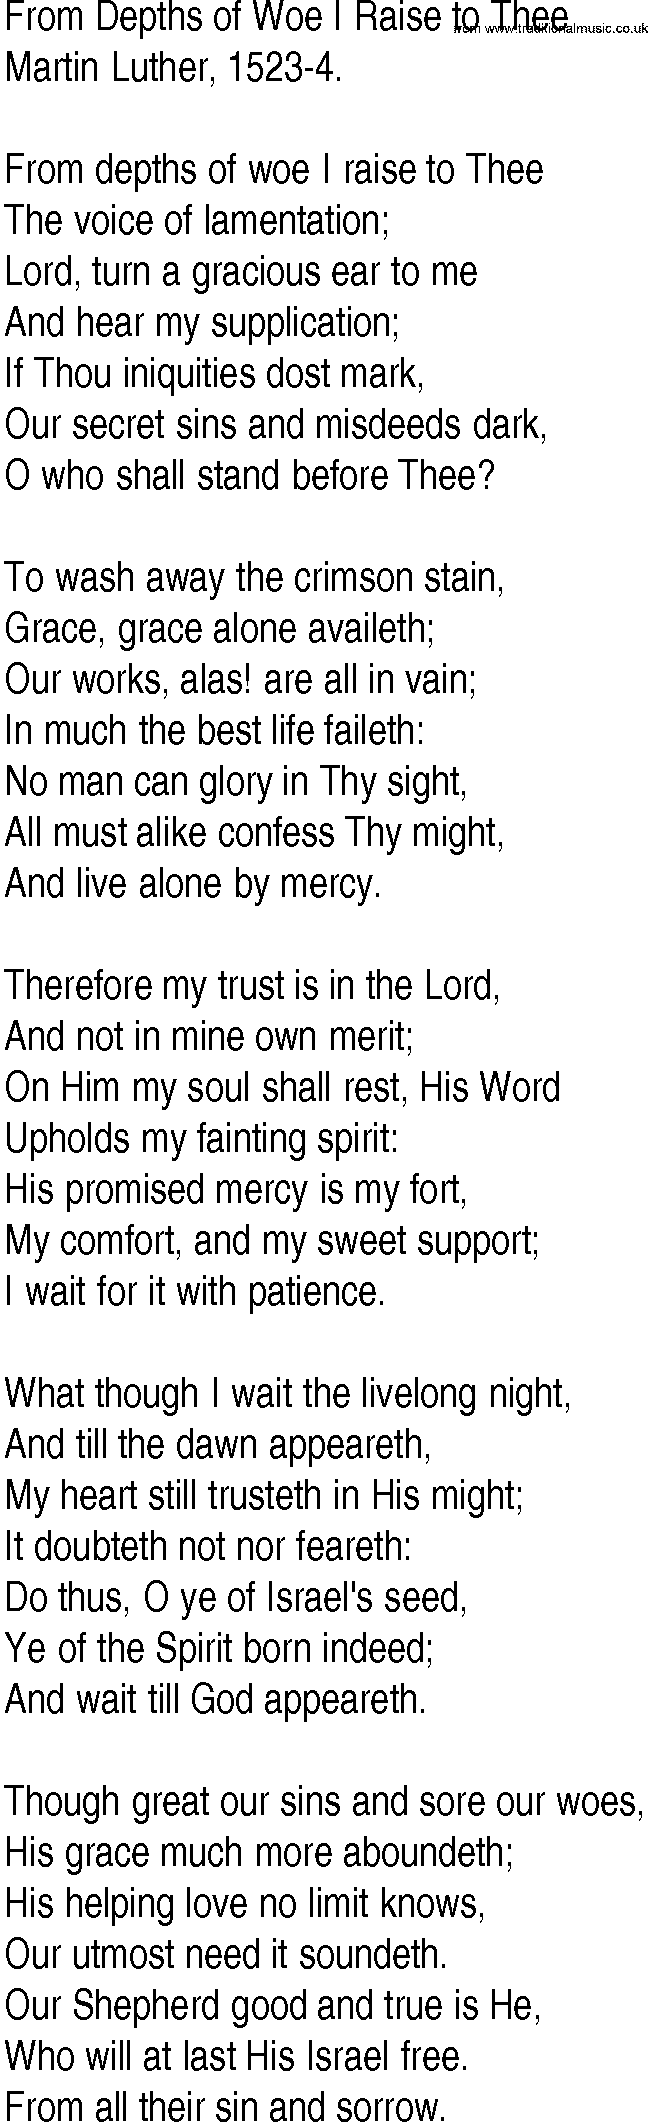 Hymn and Gospel Song: From Depths of Woe I Raise to Thee by Martin Luther lyrics